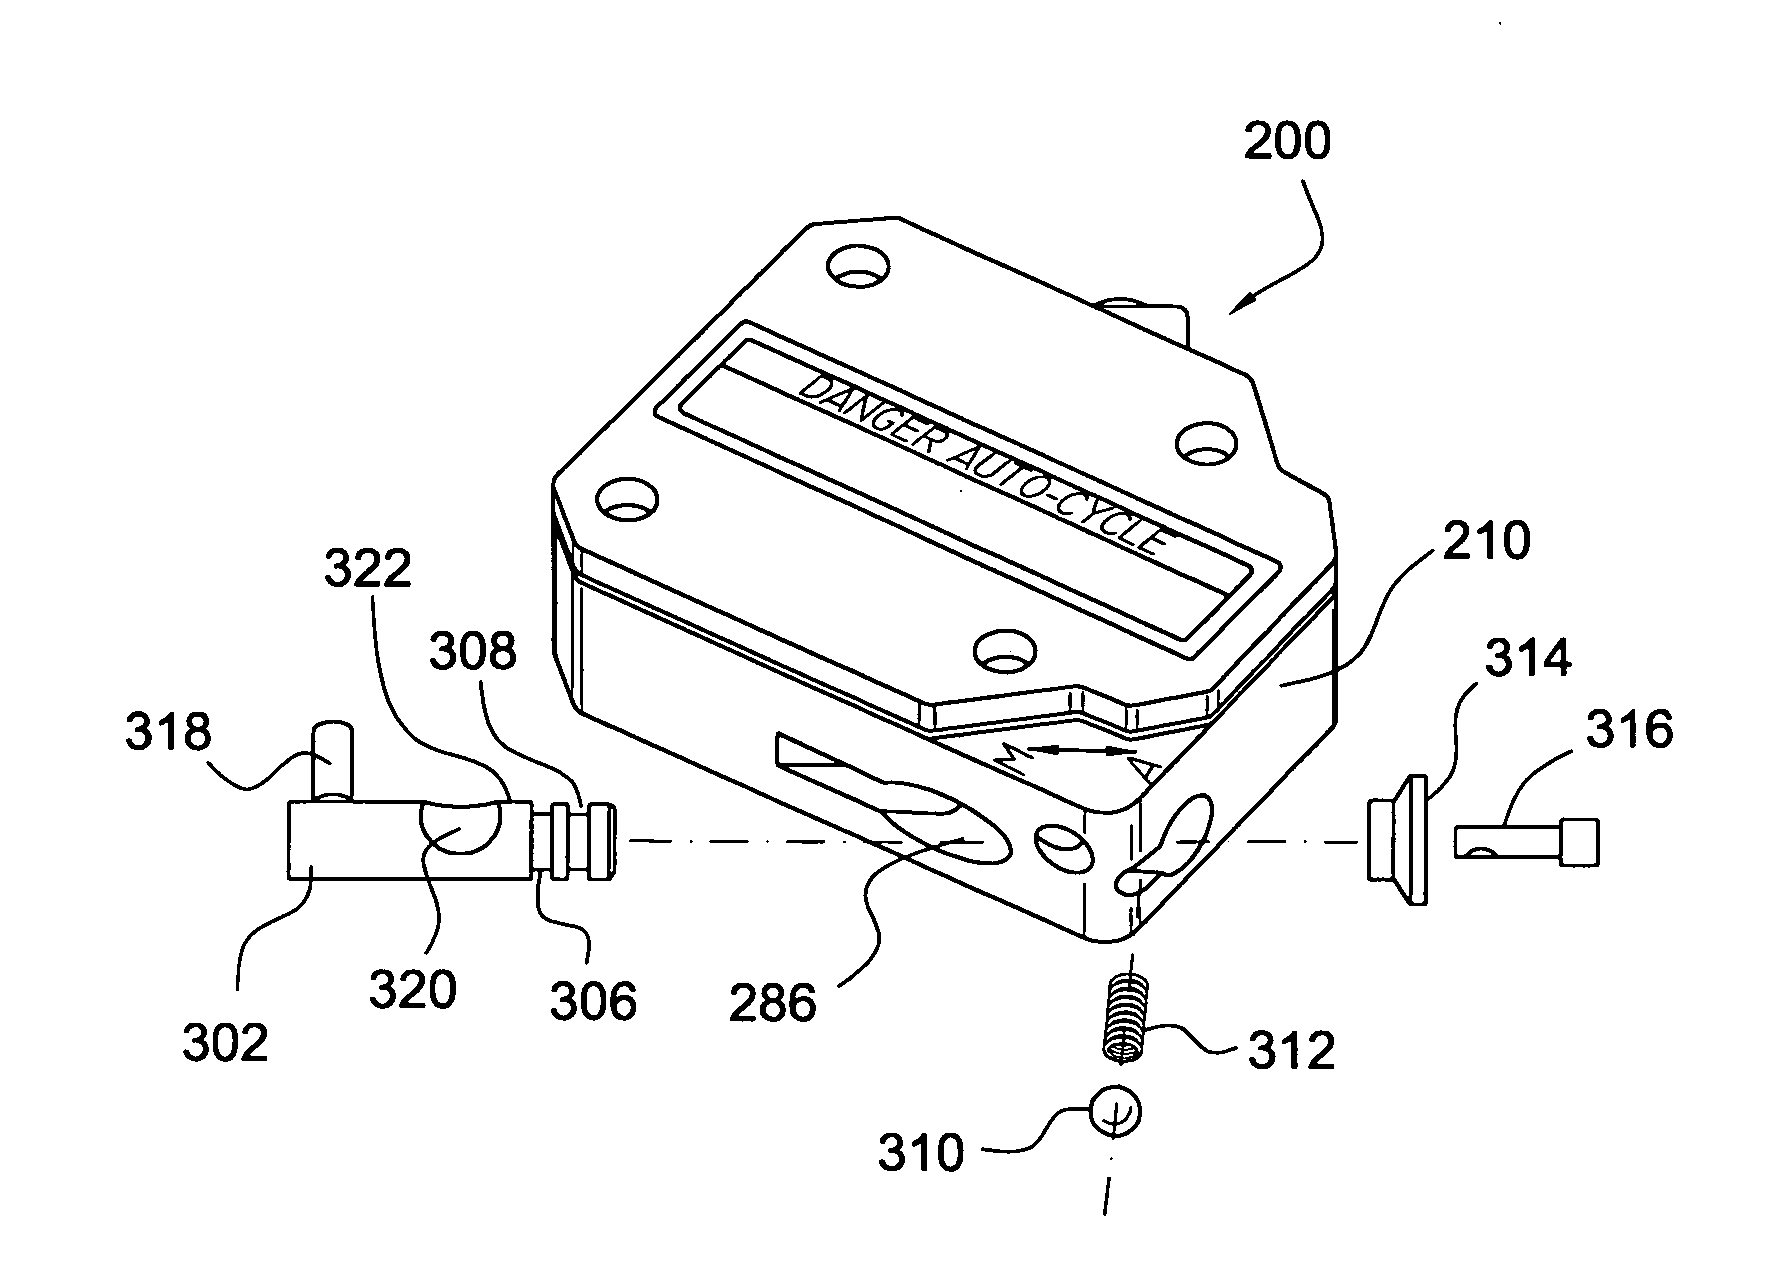 Cap assembly of a fastener-driving tool having switch mechanism incorporated therein for switching modes of operation of the fastener-driving tool